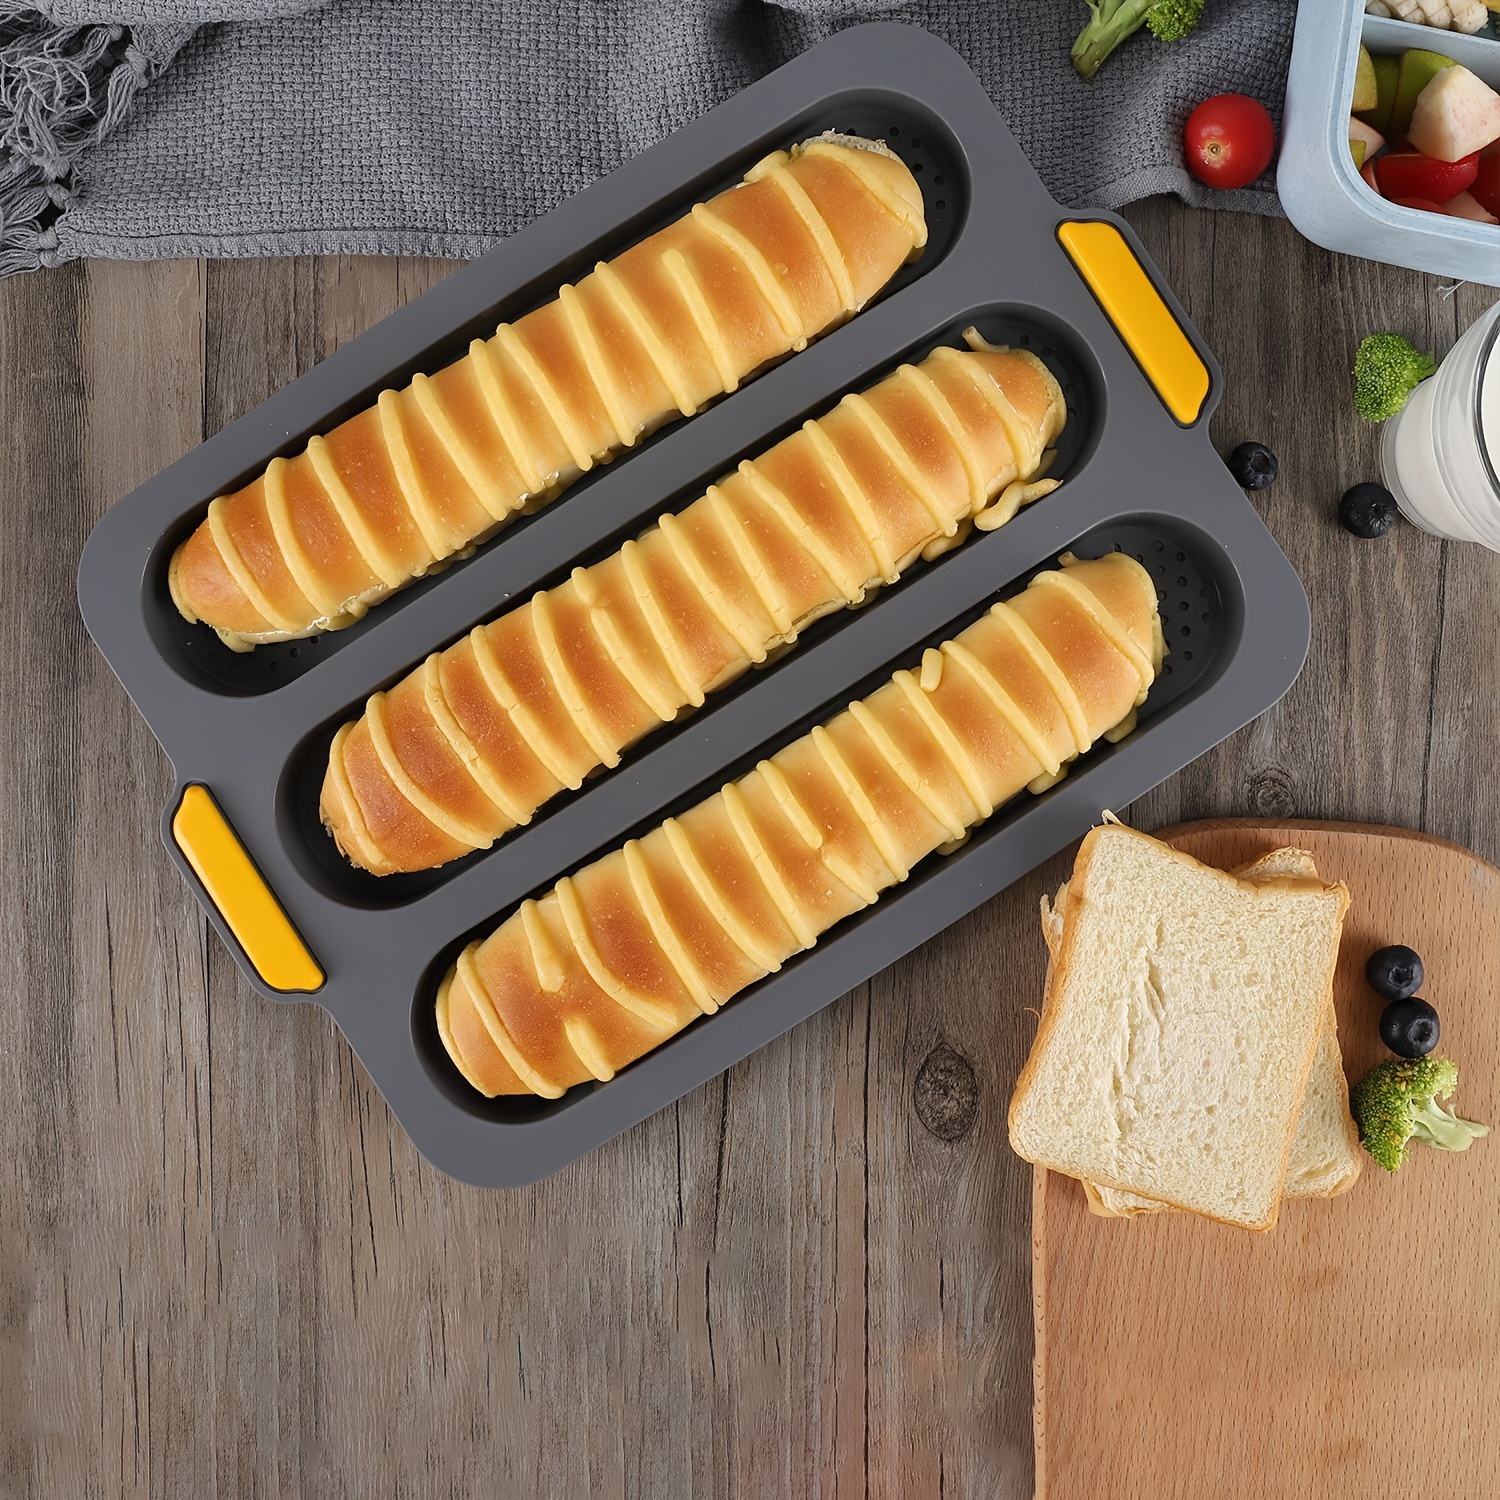 Silicone Loaf Pan Baking Pan for Baking Baguette/Hot Dog Bread